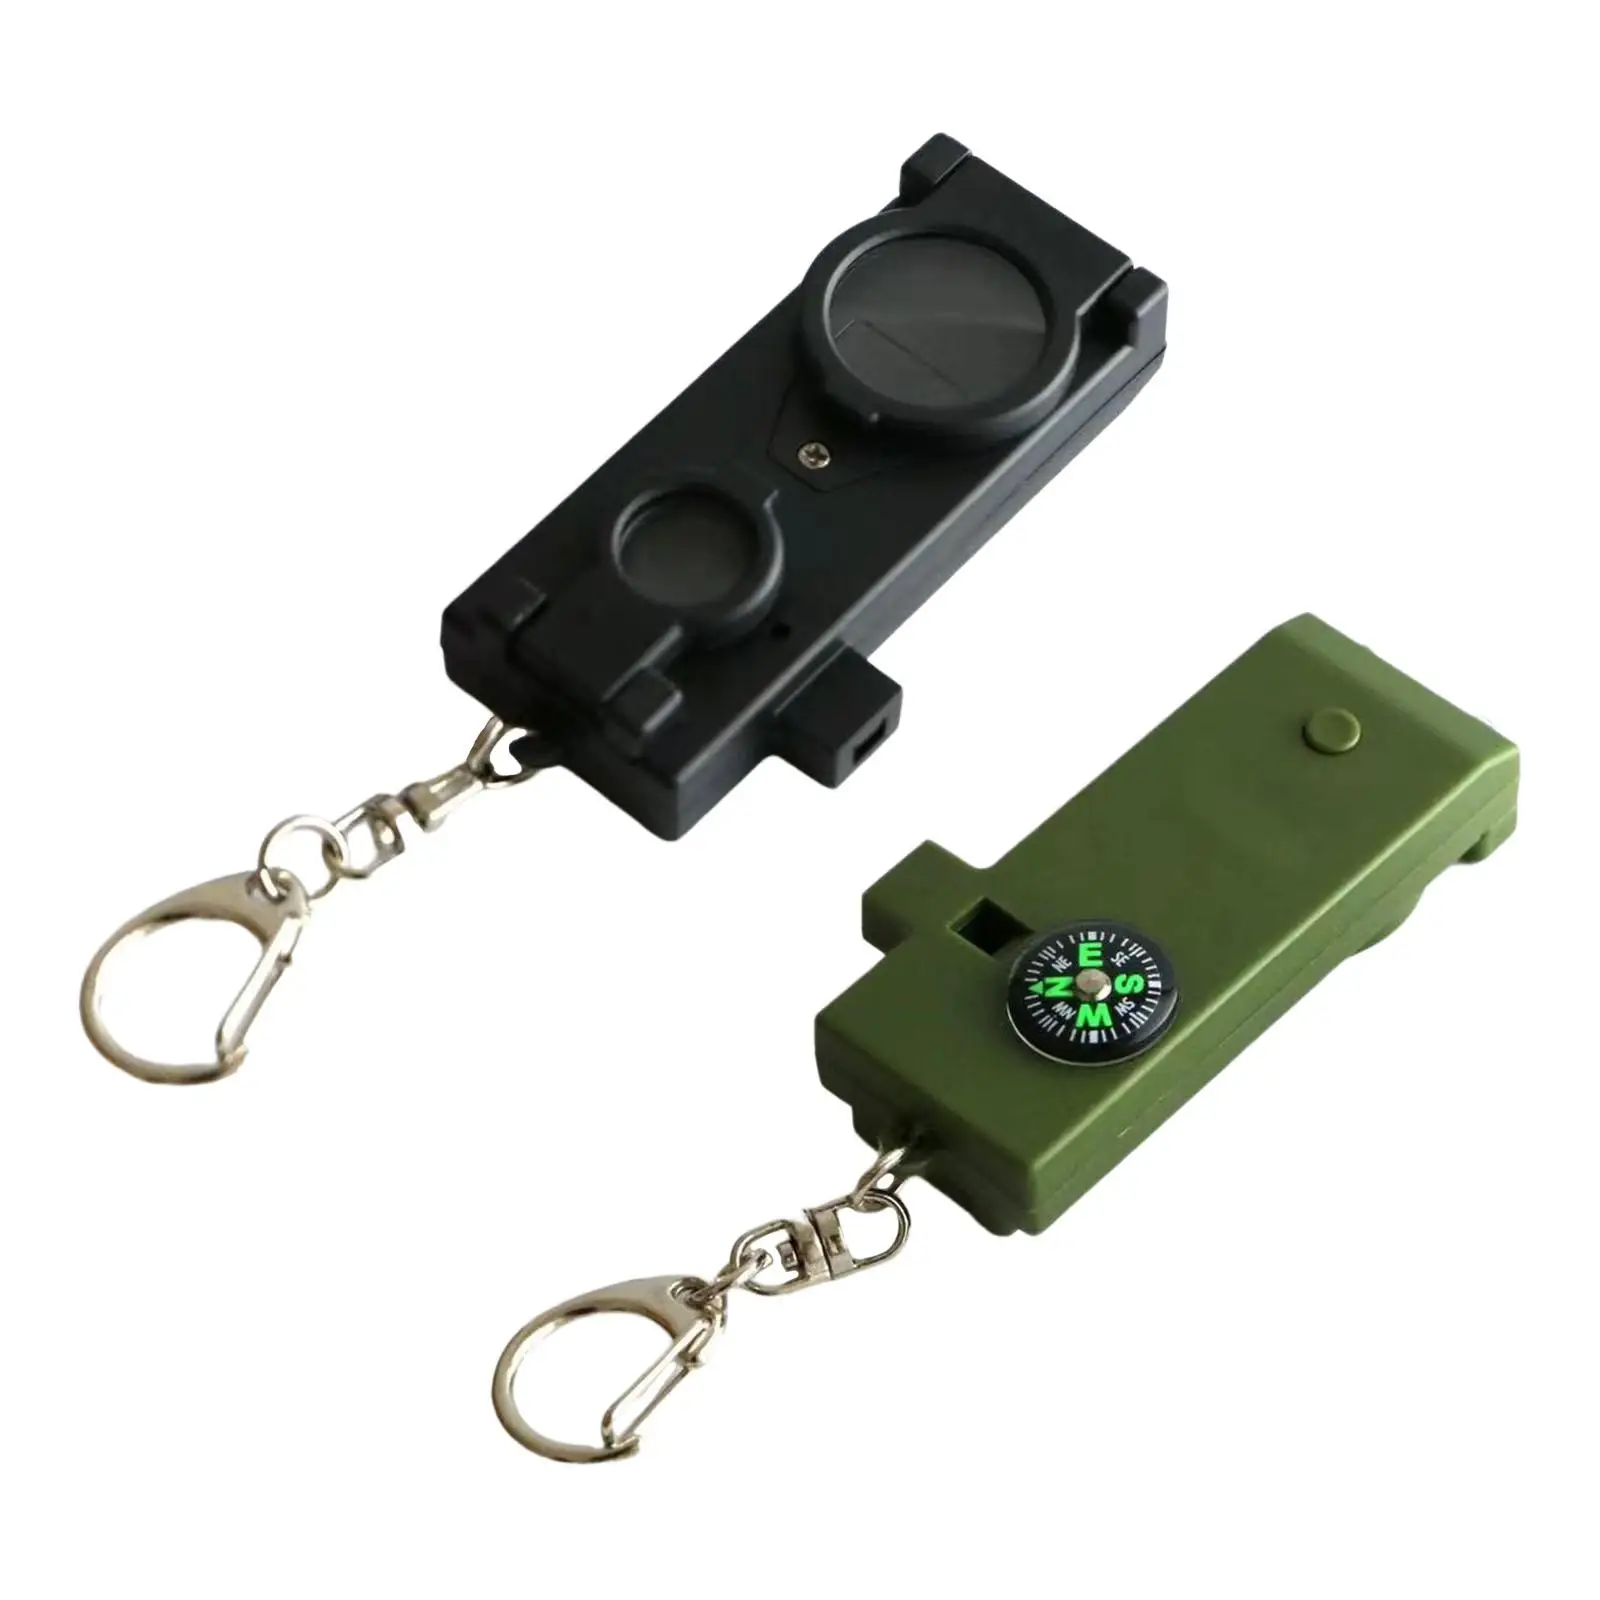 

Portable Outdoor Multifunctional Whistle Multifunction Tool Telescope Compass with Keychain for Exploring Camping Fishing Hiking